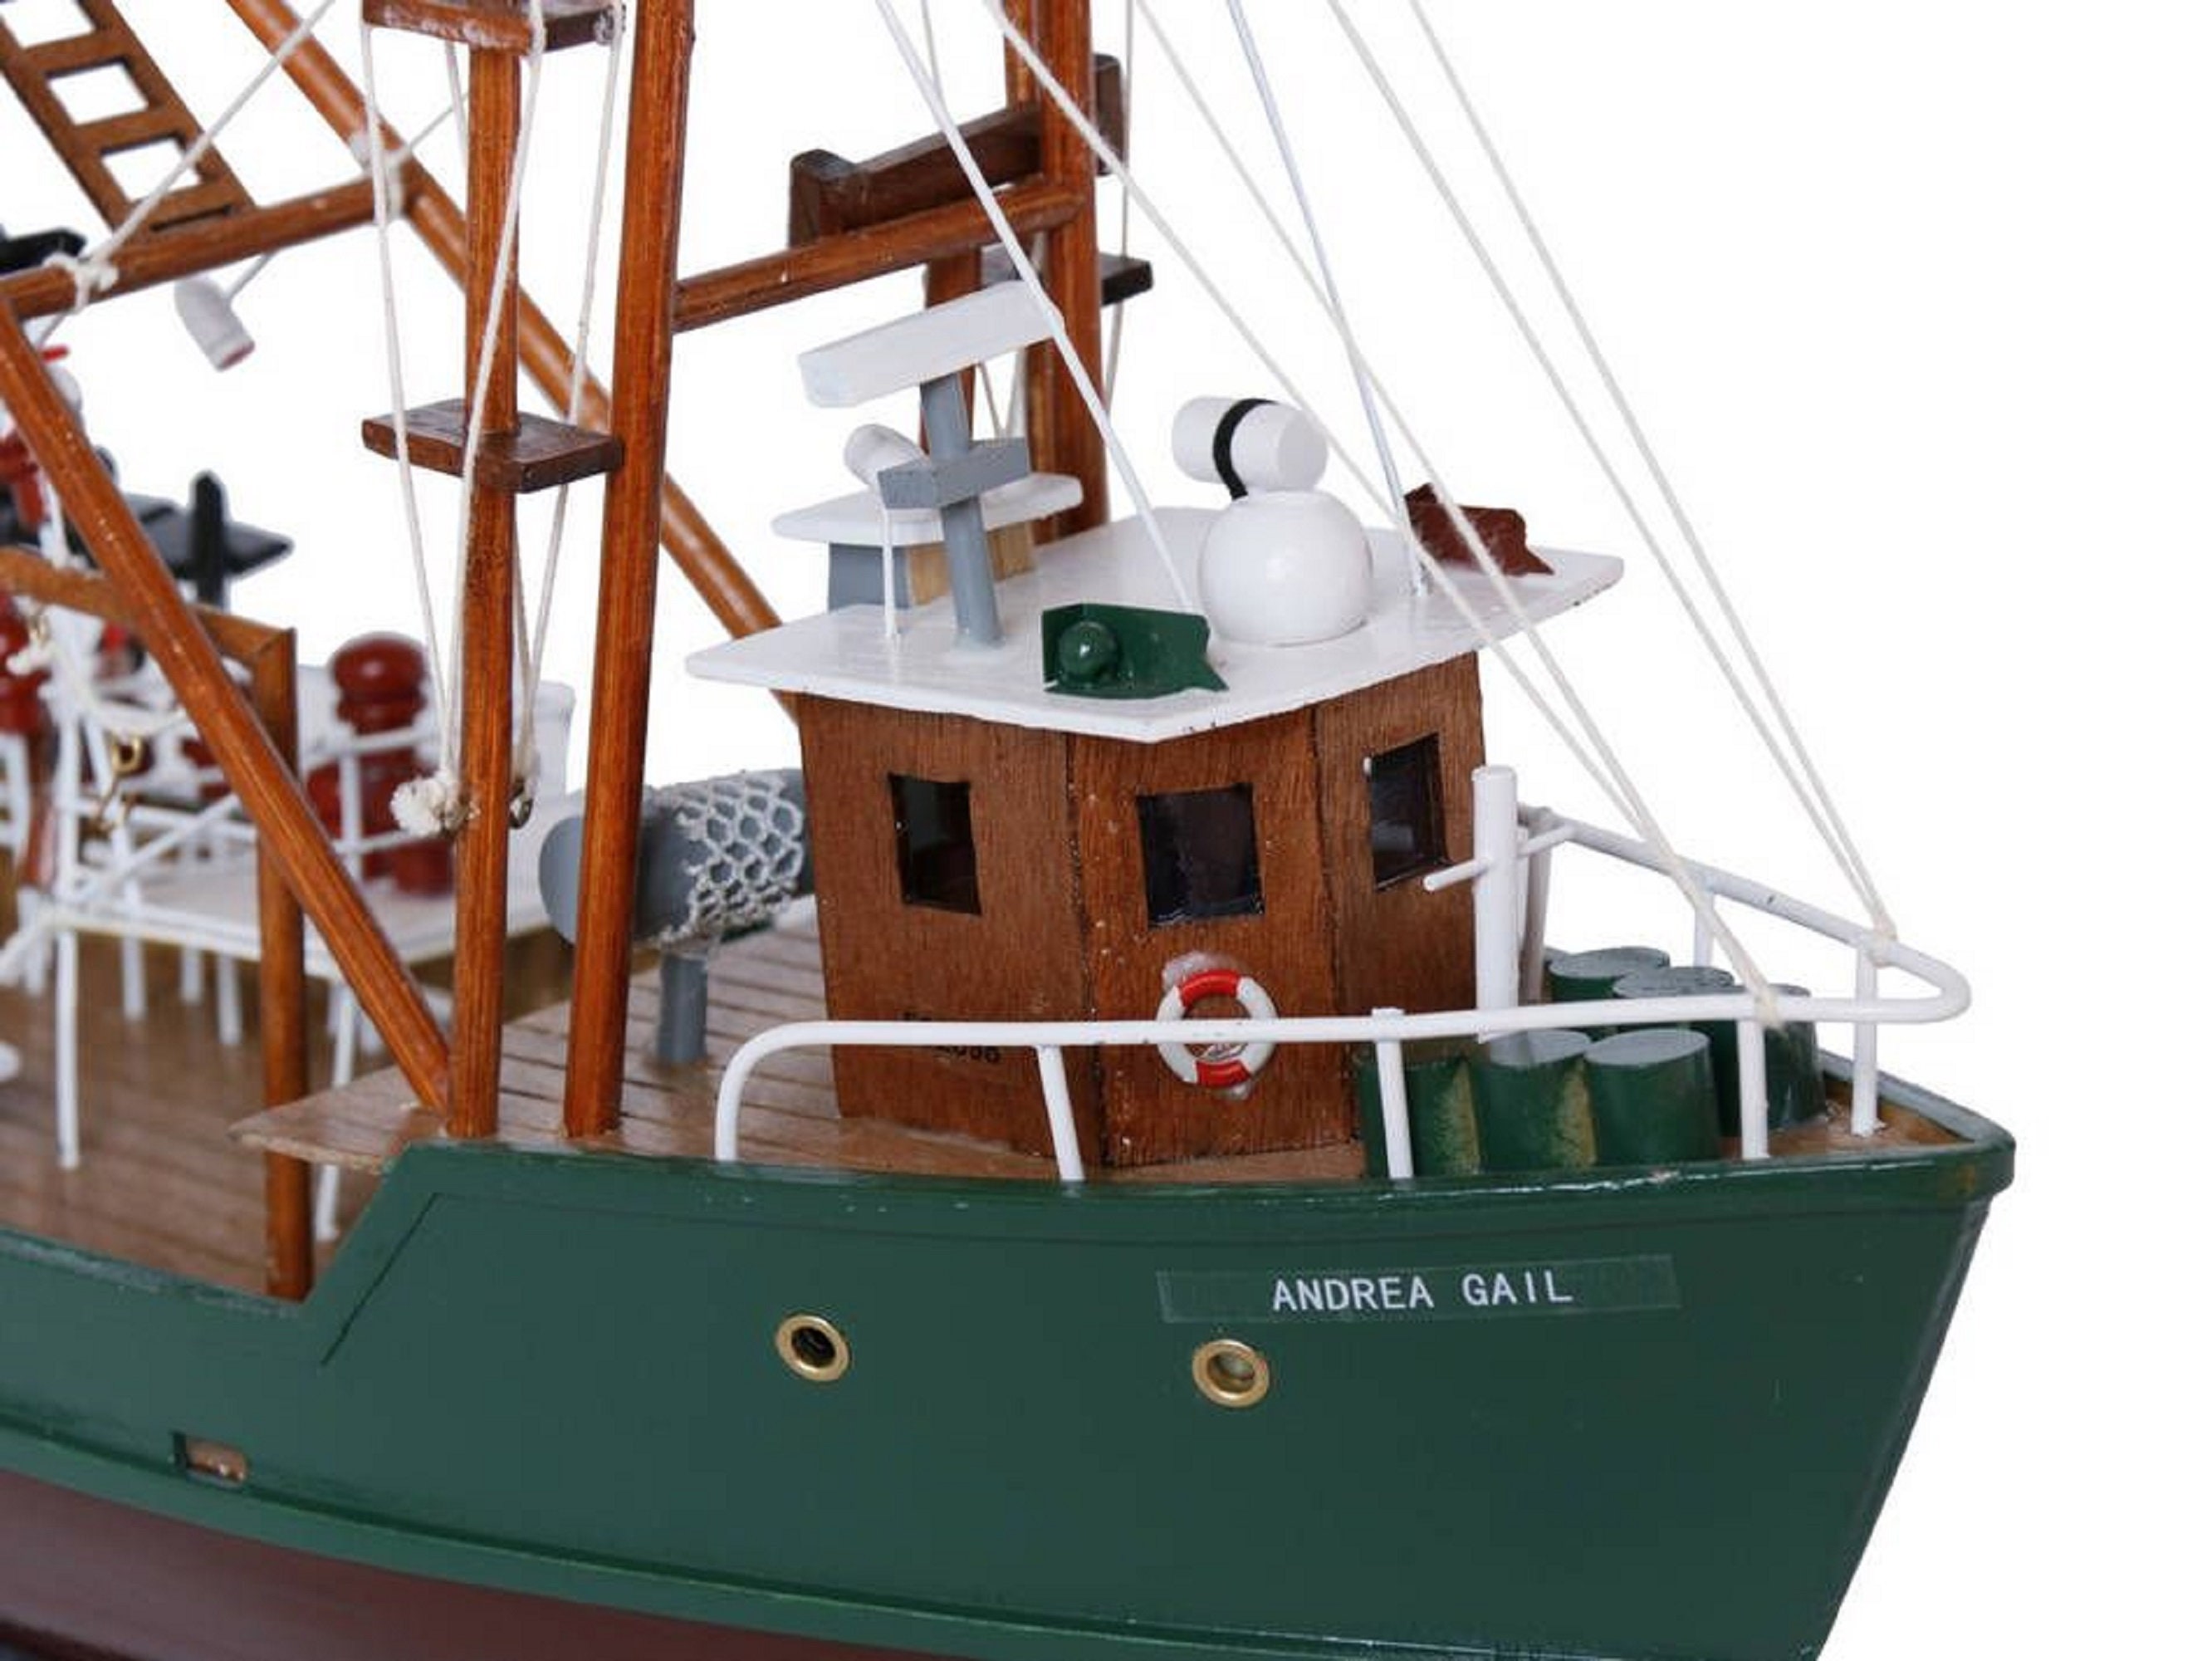 Sold At Auction: Wooden Andrea Gail The Perfect Storm Model, 47% OFF